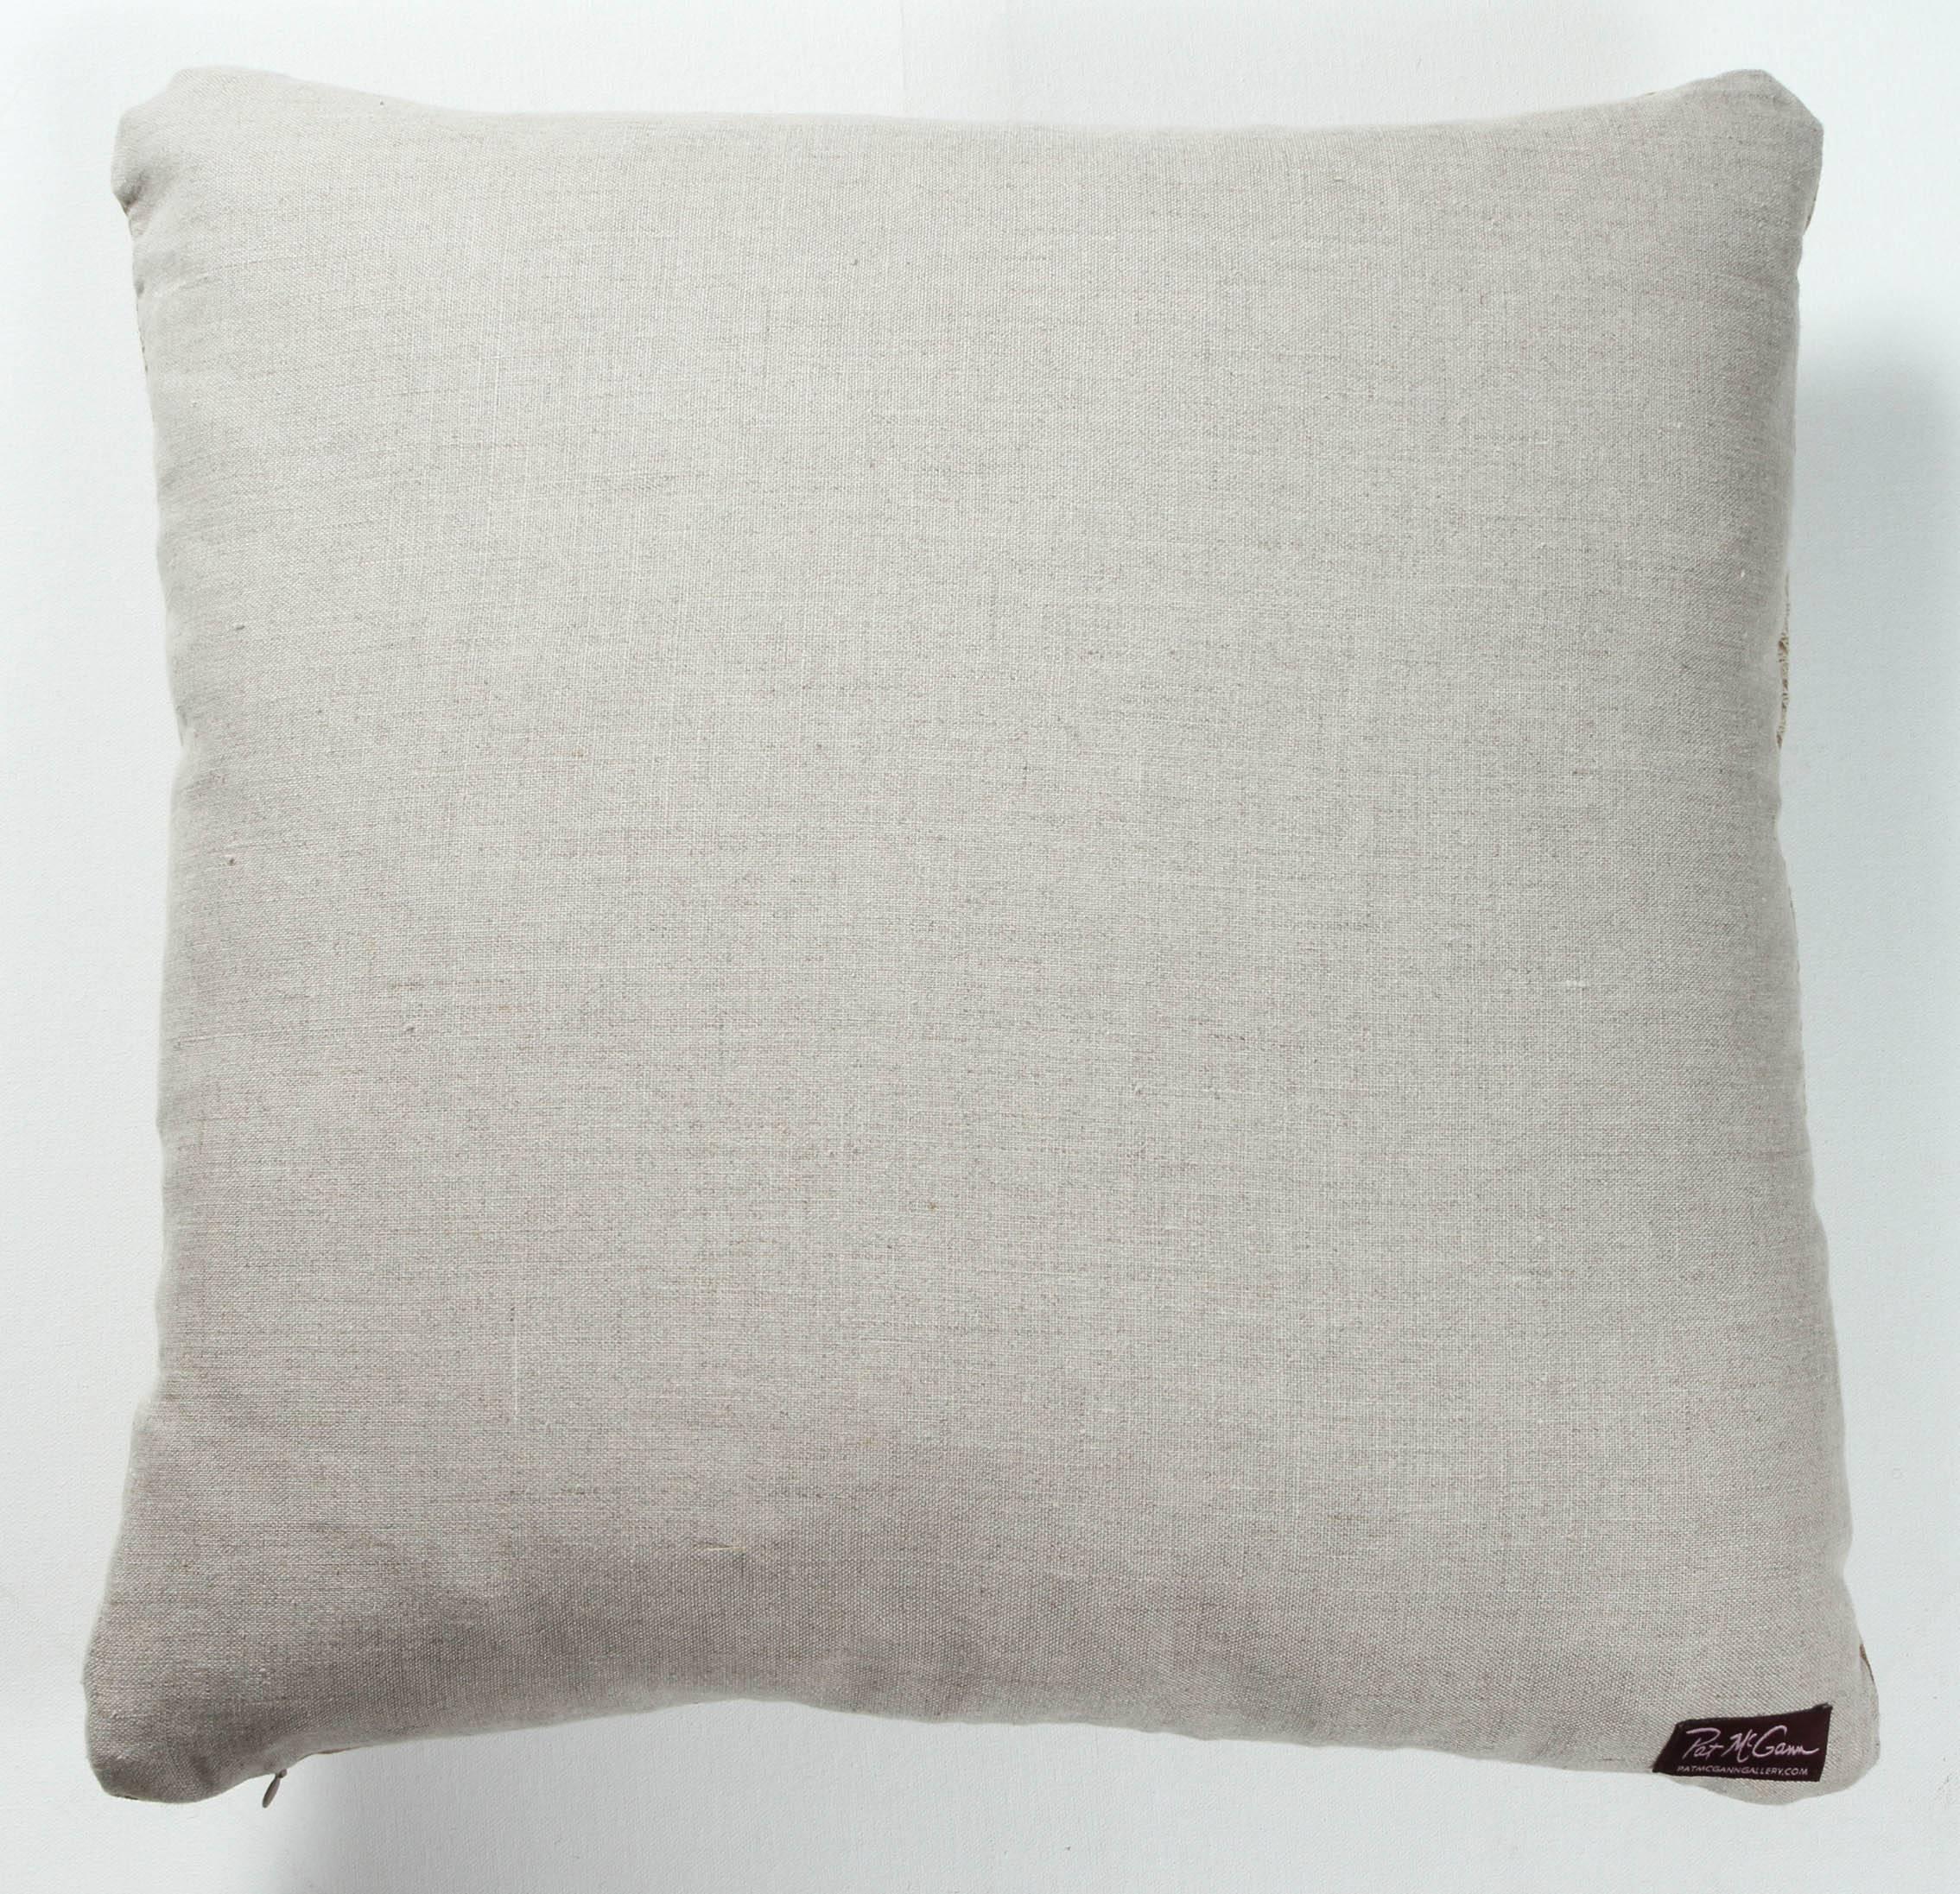 Nigerian African Embroidery Pillow in Ivory and Oatmeal Color